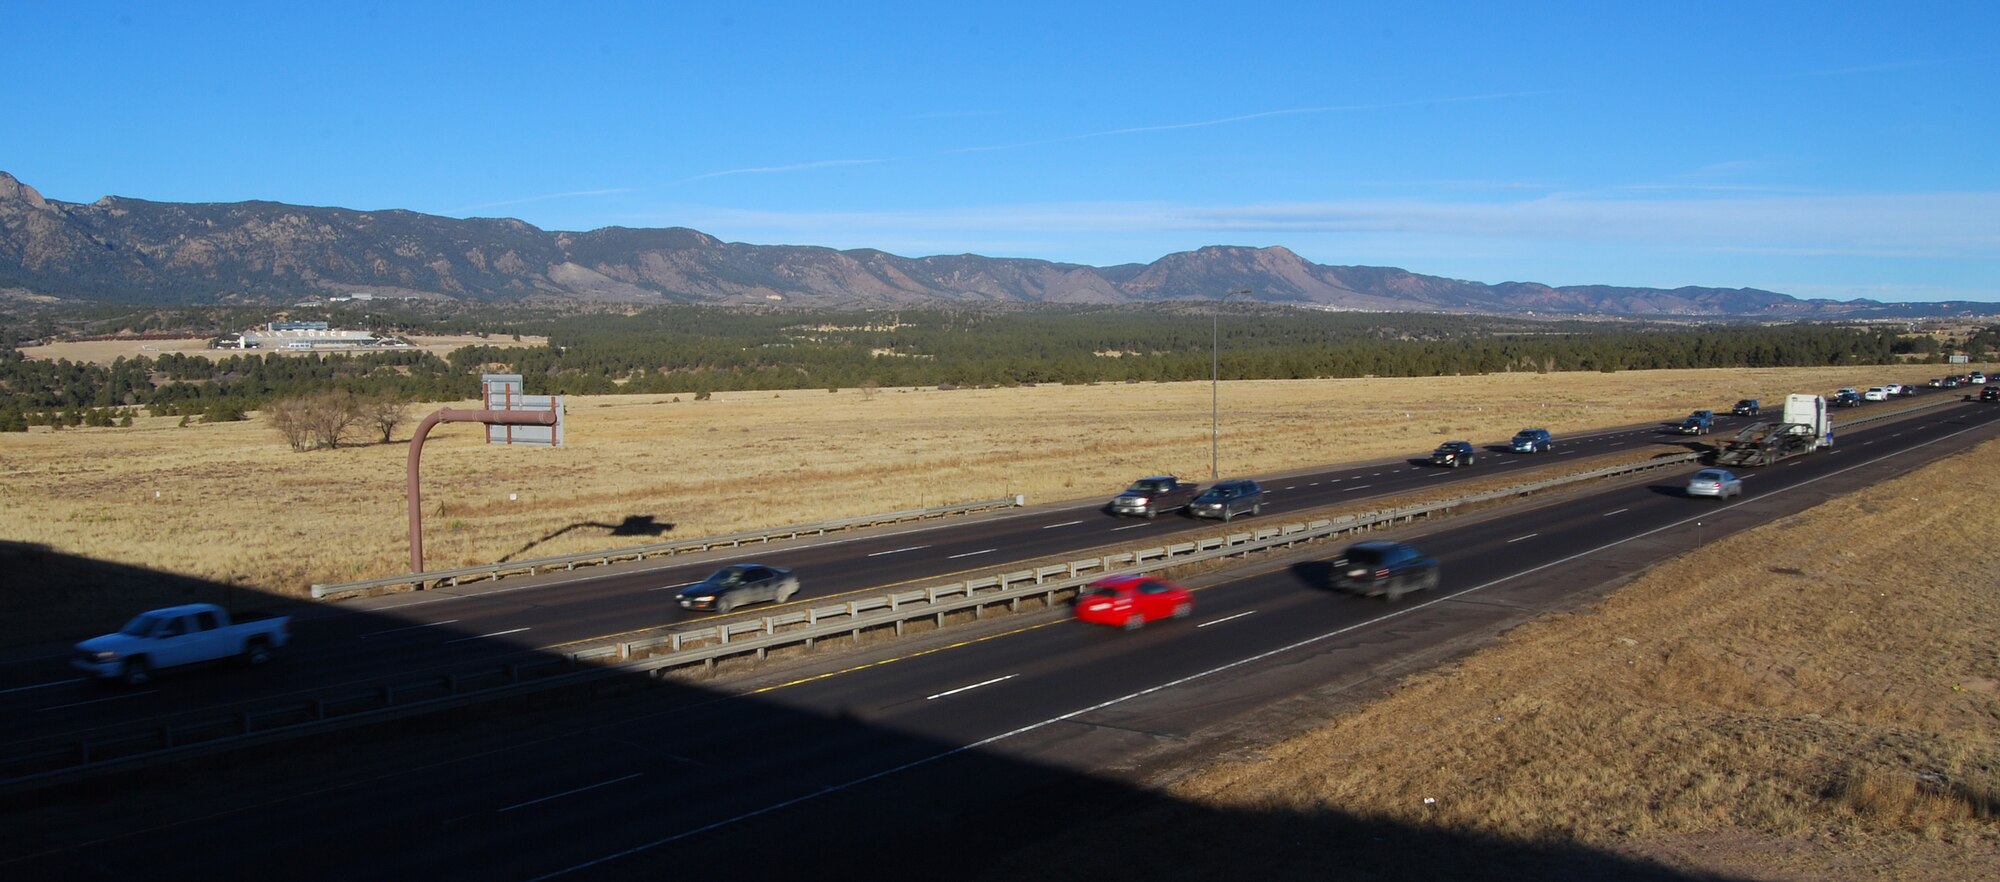 Commuters drive along Interstate 25 near Interquest Parkway Feb. 6, 2013. The Colorado Department of Transportation is scheduled to begin a construction project March 1 that will widen Interstate 25 from four lanes to six between Woodmen Road and State Highway 105 in Monument. Commuters should expect delays driving to and from the Air Force Academy while construction is underway. (U.S. Air Force photo/Don Branum)